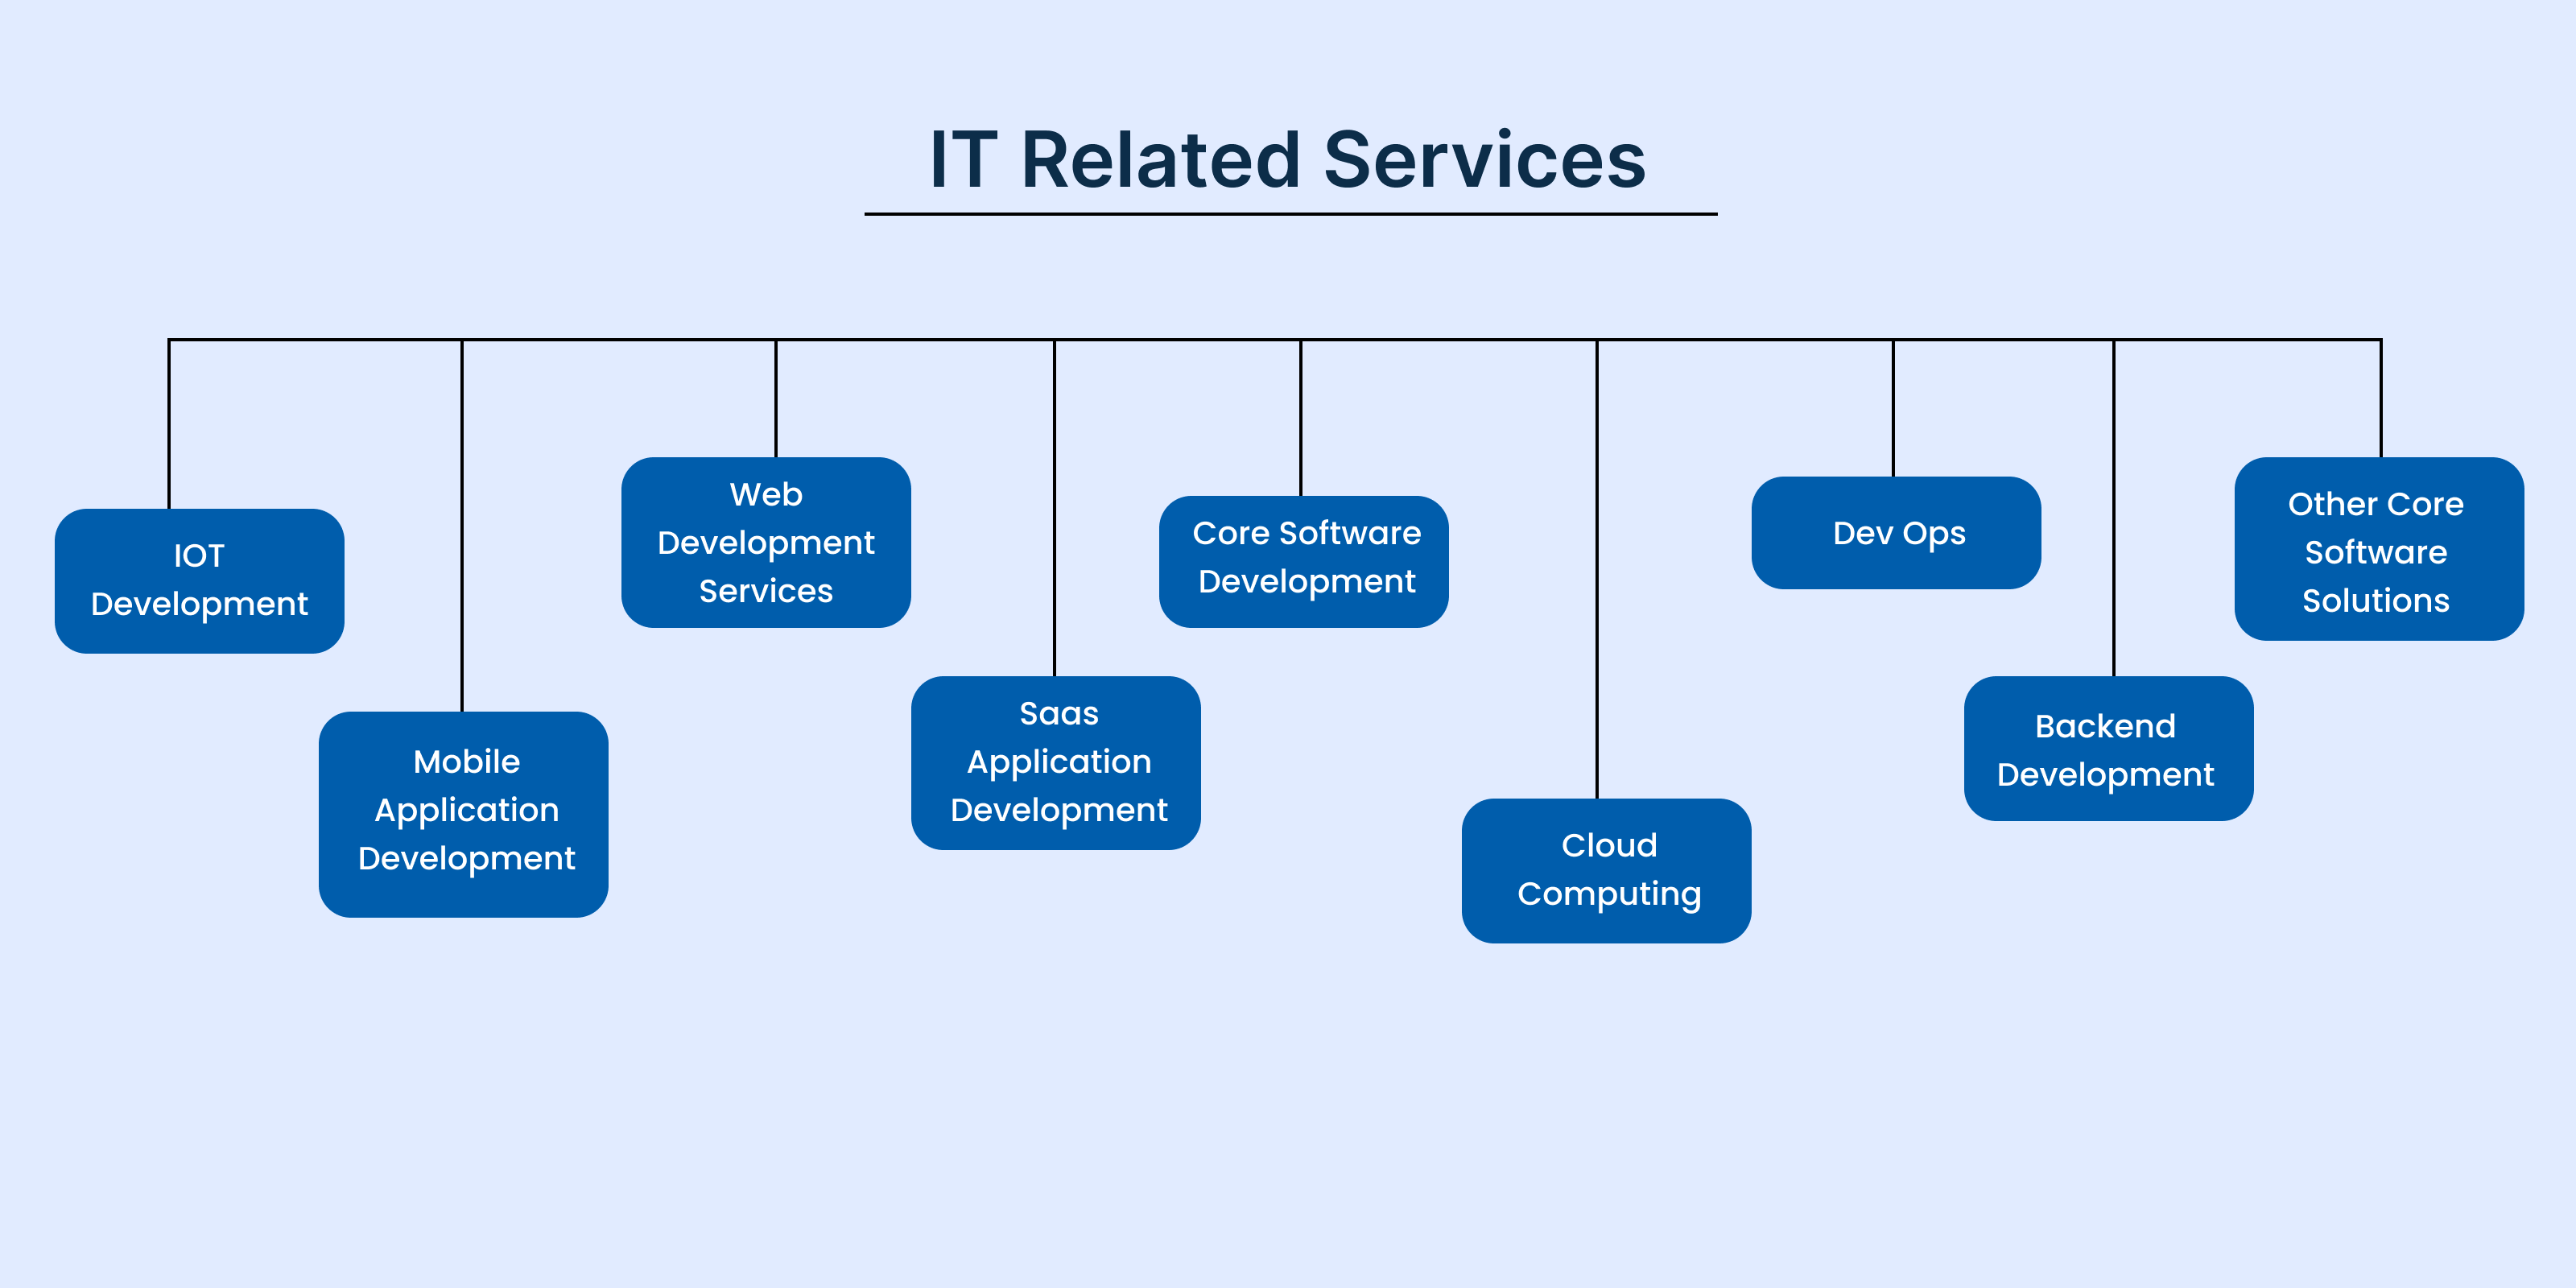 Visual representation of services that can be outsourced for a small business for IT related purpose